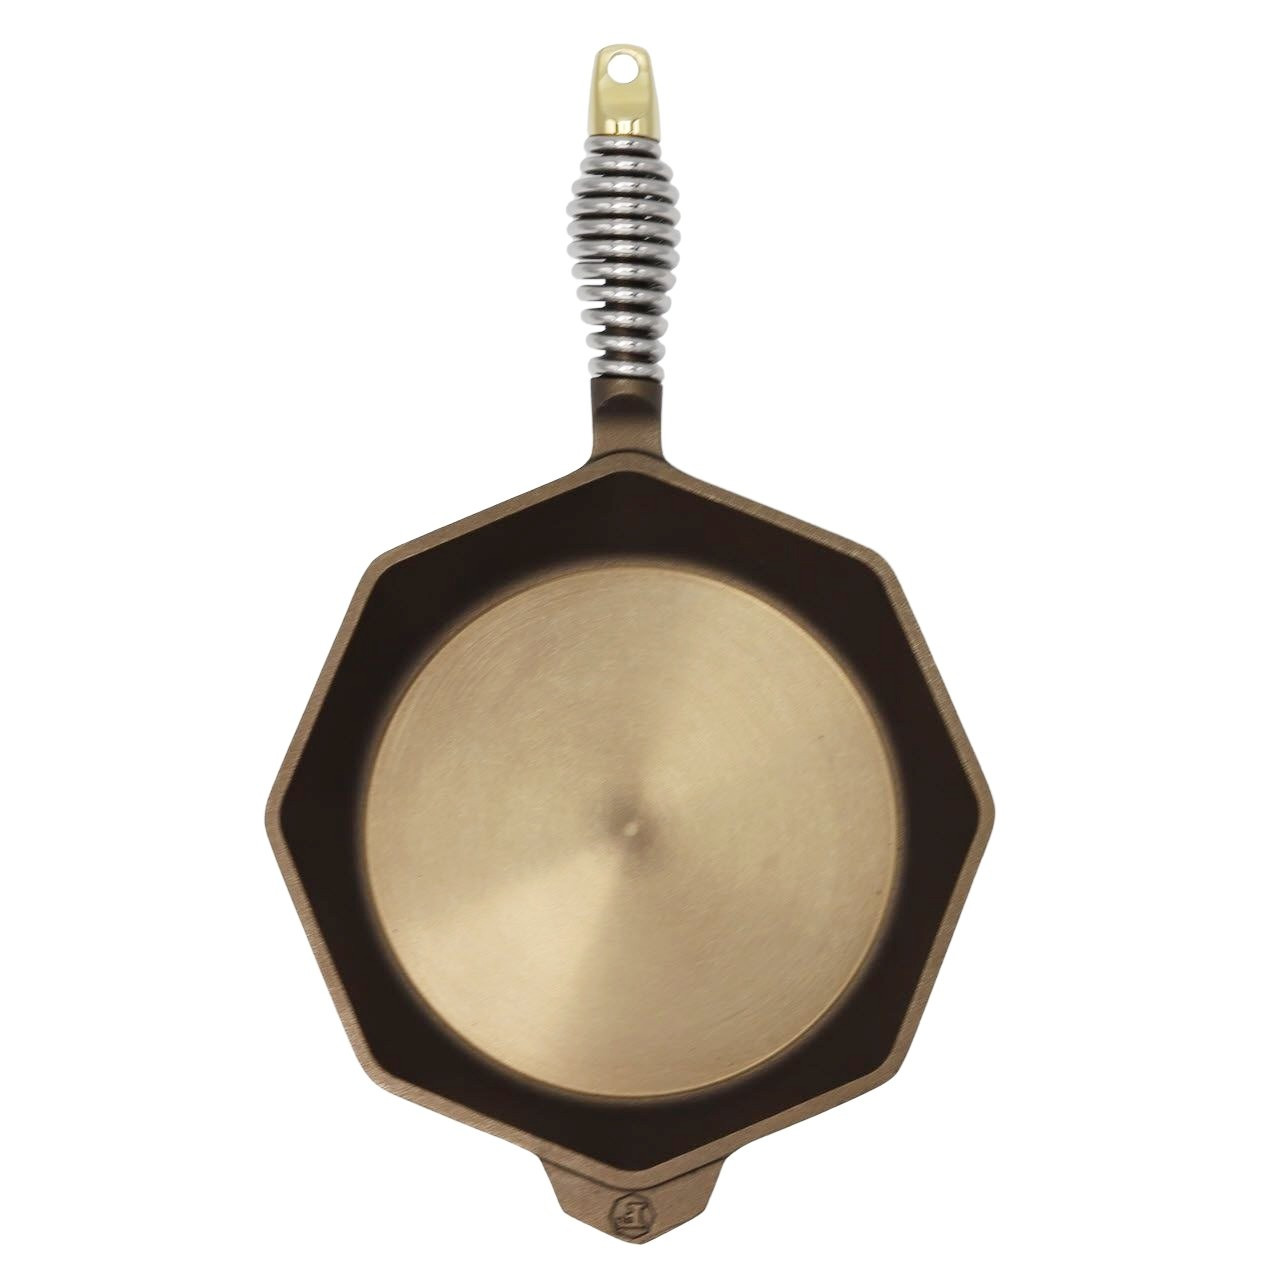 This flat cast iron pan is from our newest collection!